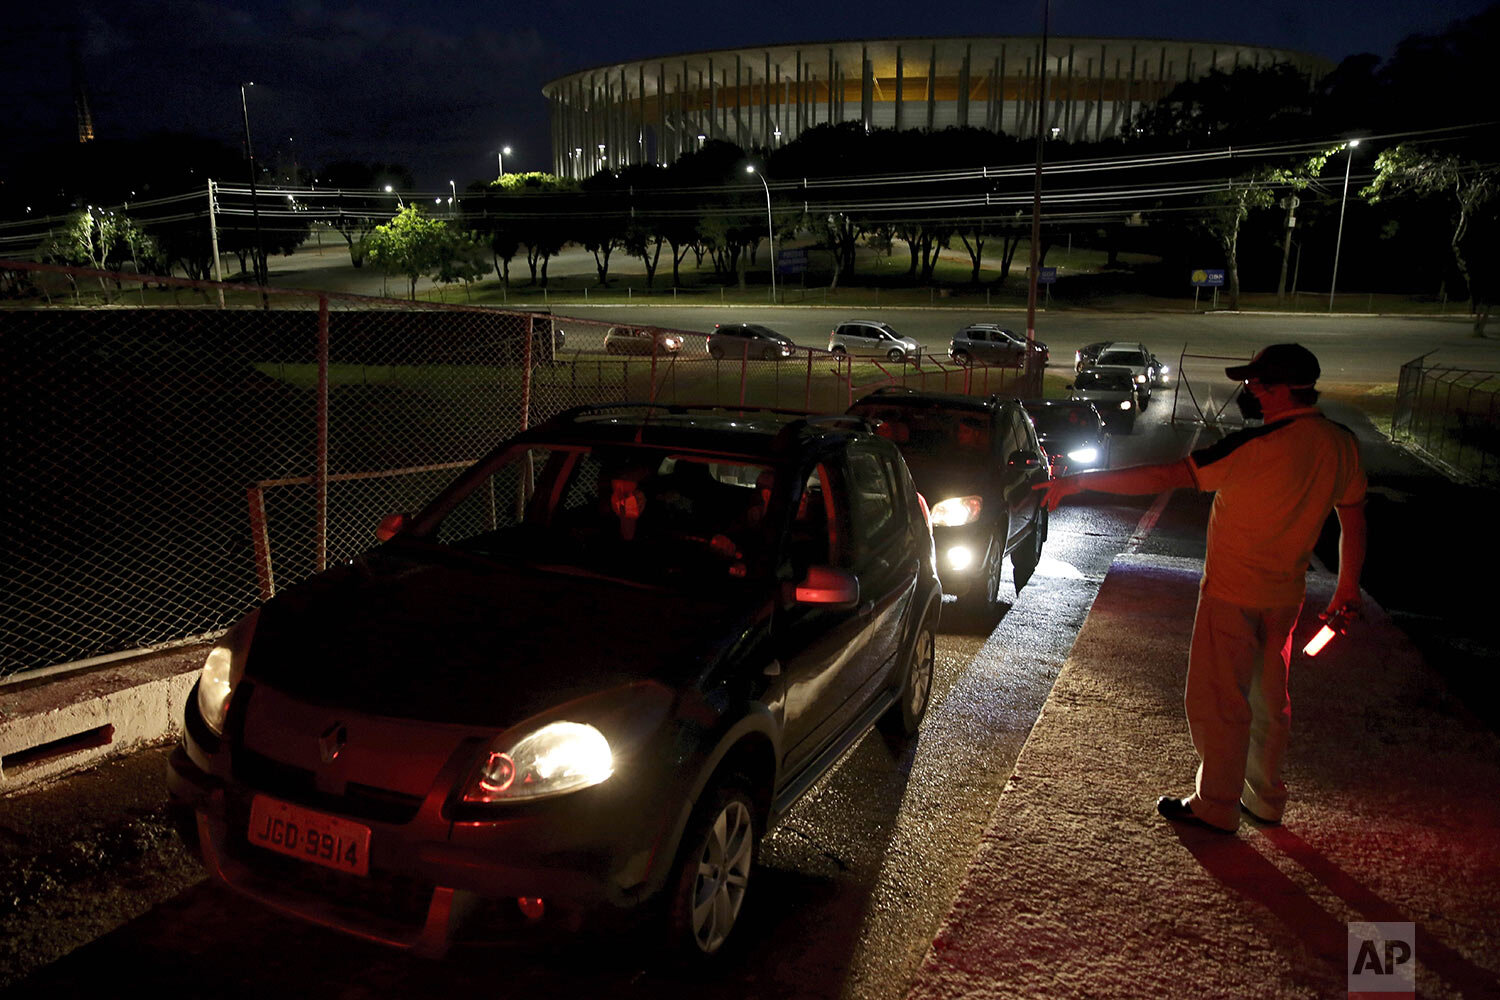  Jair de Souza speaks to drivers arriving at a drive-in movie theater, amid the new coronavirus pandemic in Brasilia, Brazil, Wednesday, May 13, 2020. (AP Photo/Eraldo Peres) 